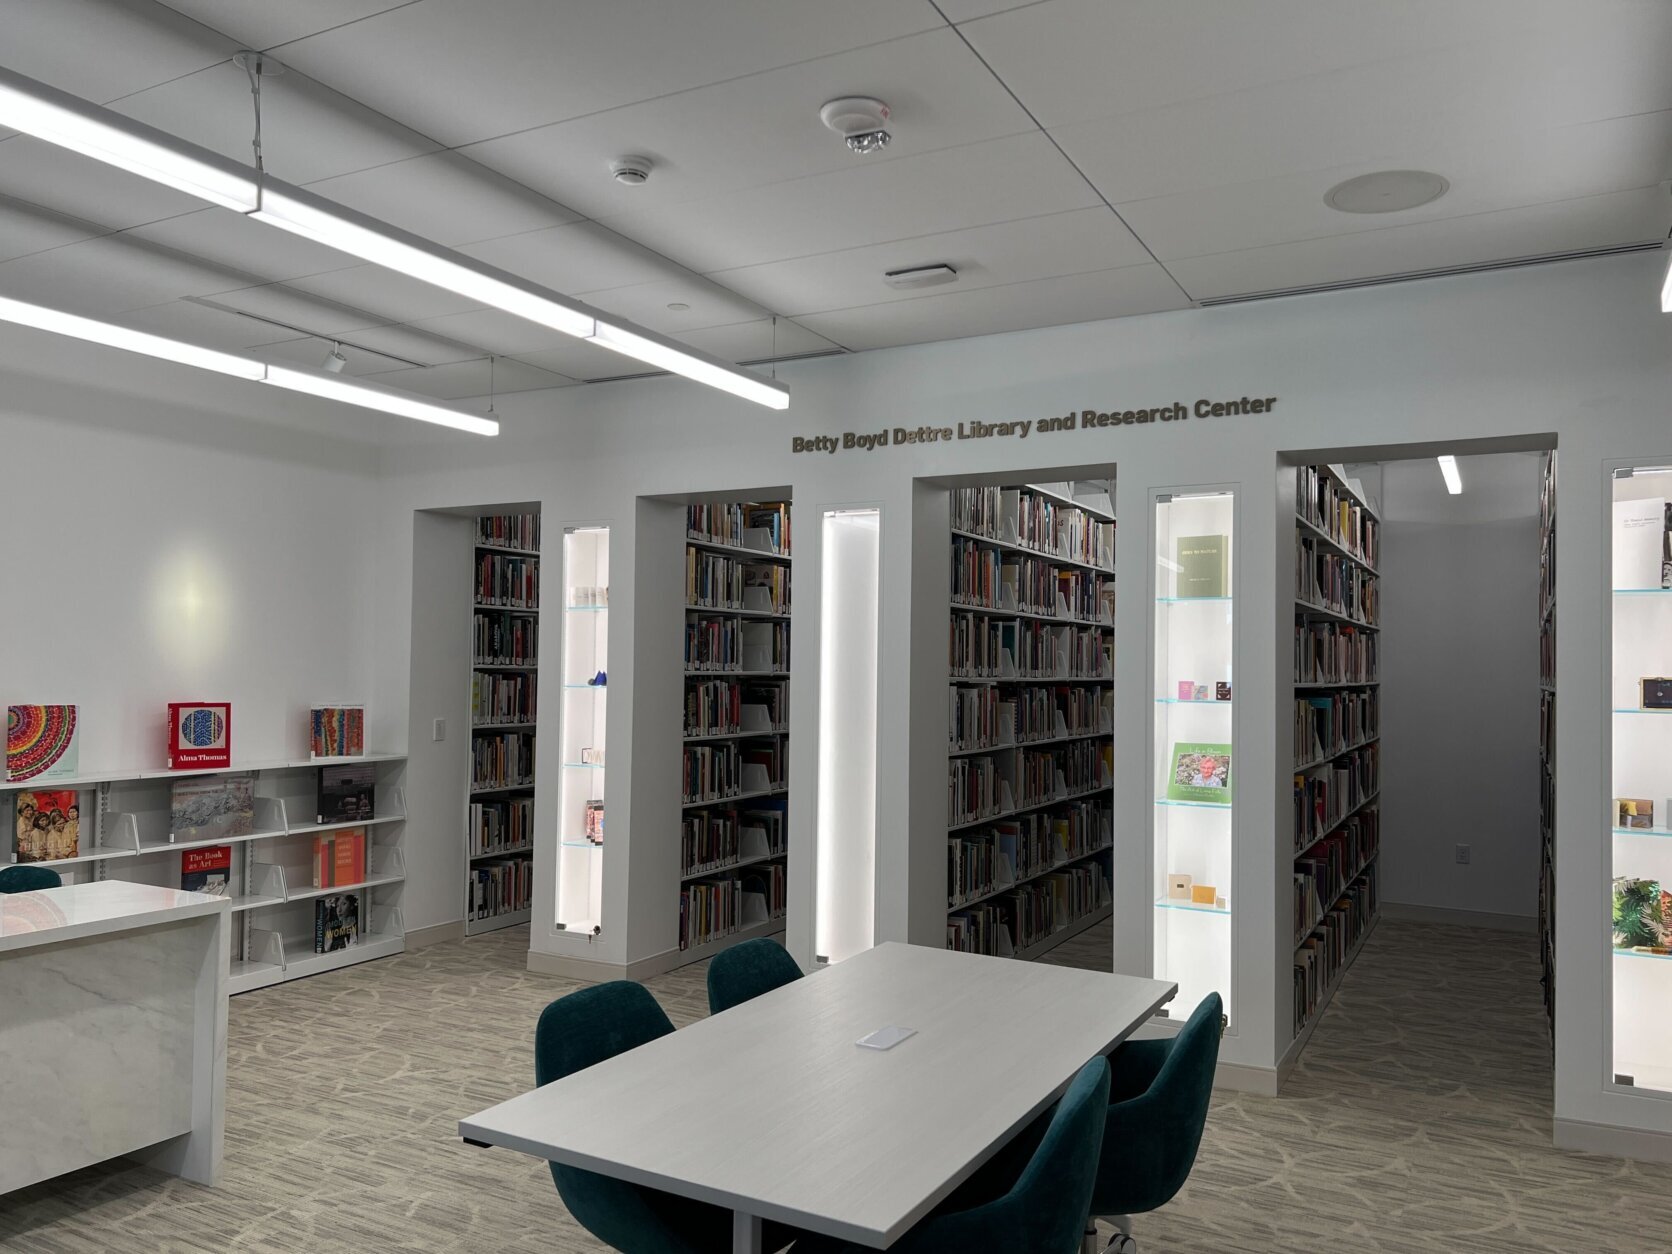 <p>The fourth floor is the learning commons.</p>
<p>&#8220;It&#8217;s the place where more of the museum changed than anywhere else,&#8221; Sterling said.</p>
<p>The library and research center were updated and the museum added a room that will be used for education and public programs.</p>
<p>In order to accommodate more compact storage in the library, Vicchio said &#8220;we had to literally take that floor out and build a new floor in its place that would support that increased load.&#8221;</p>
<p>The gallery space on the fourth floor was also expanded by 2,500 square feet.</p>
